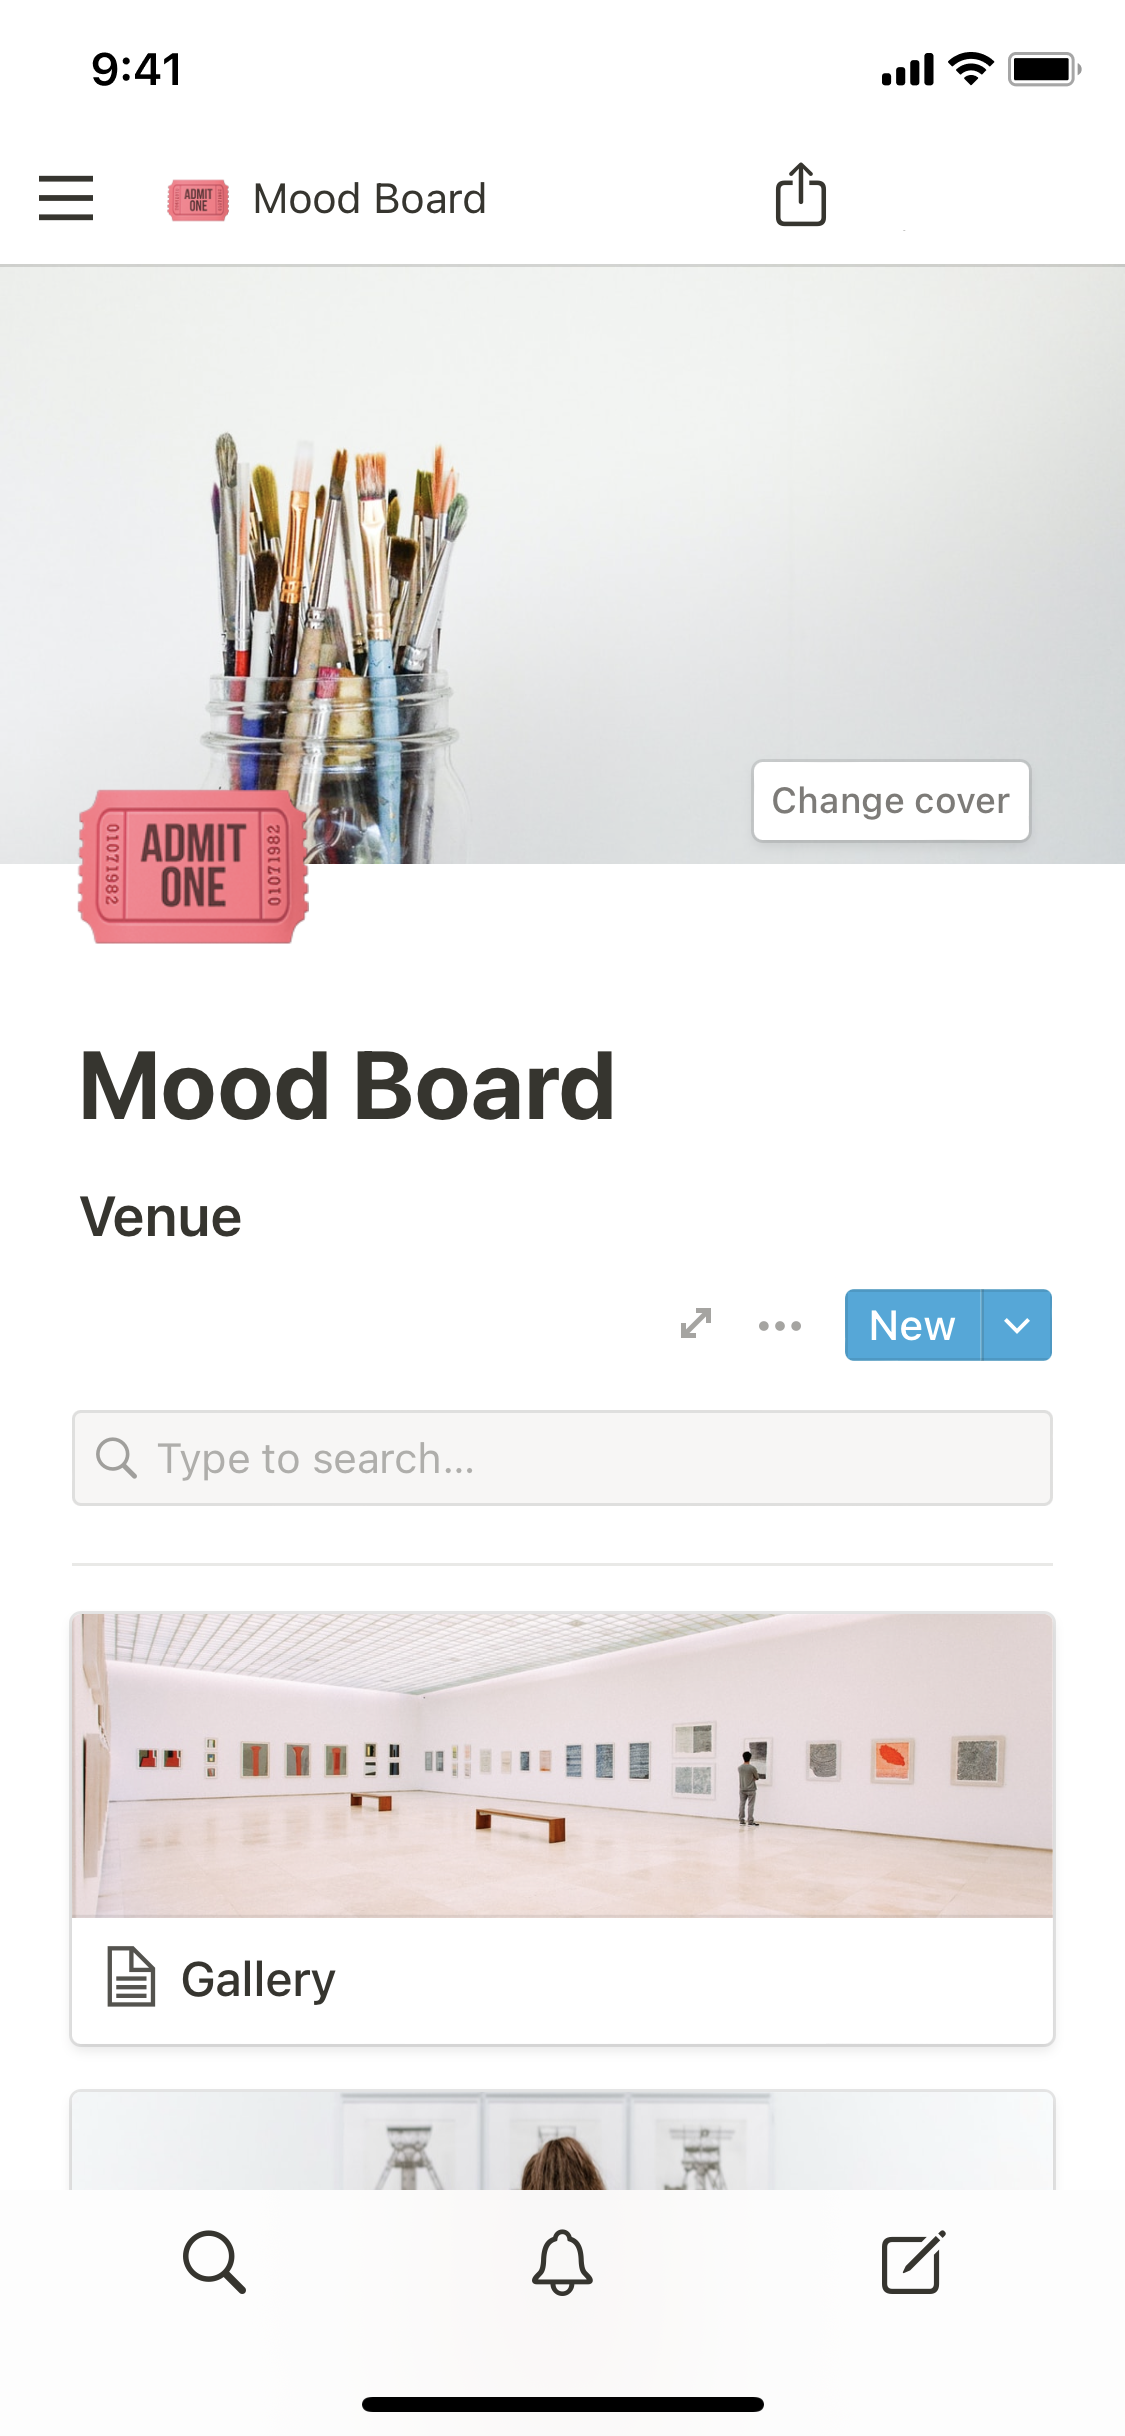 The mobile image for the Mood board template